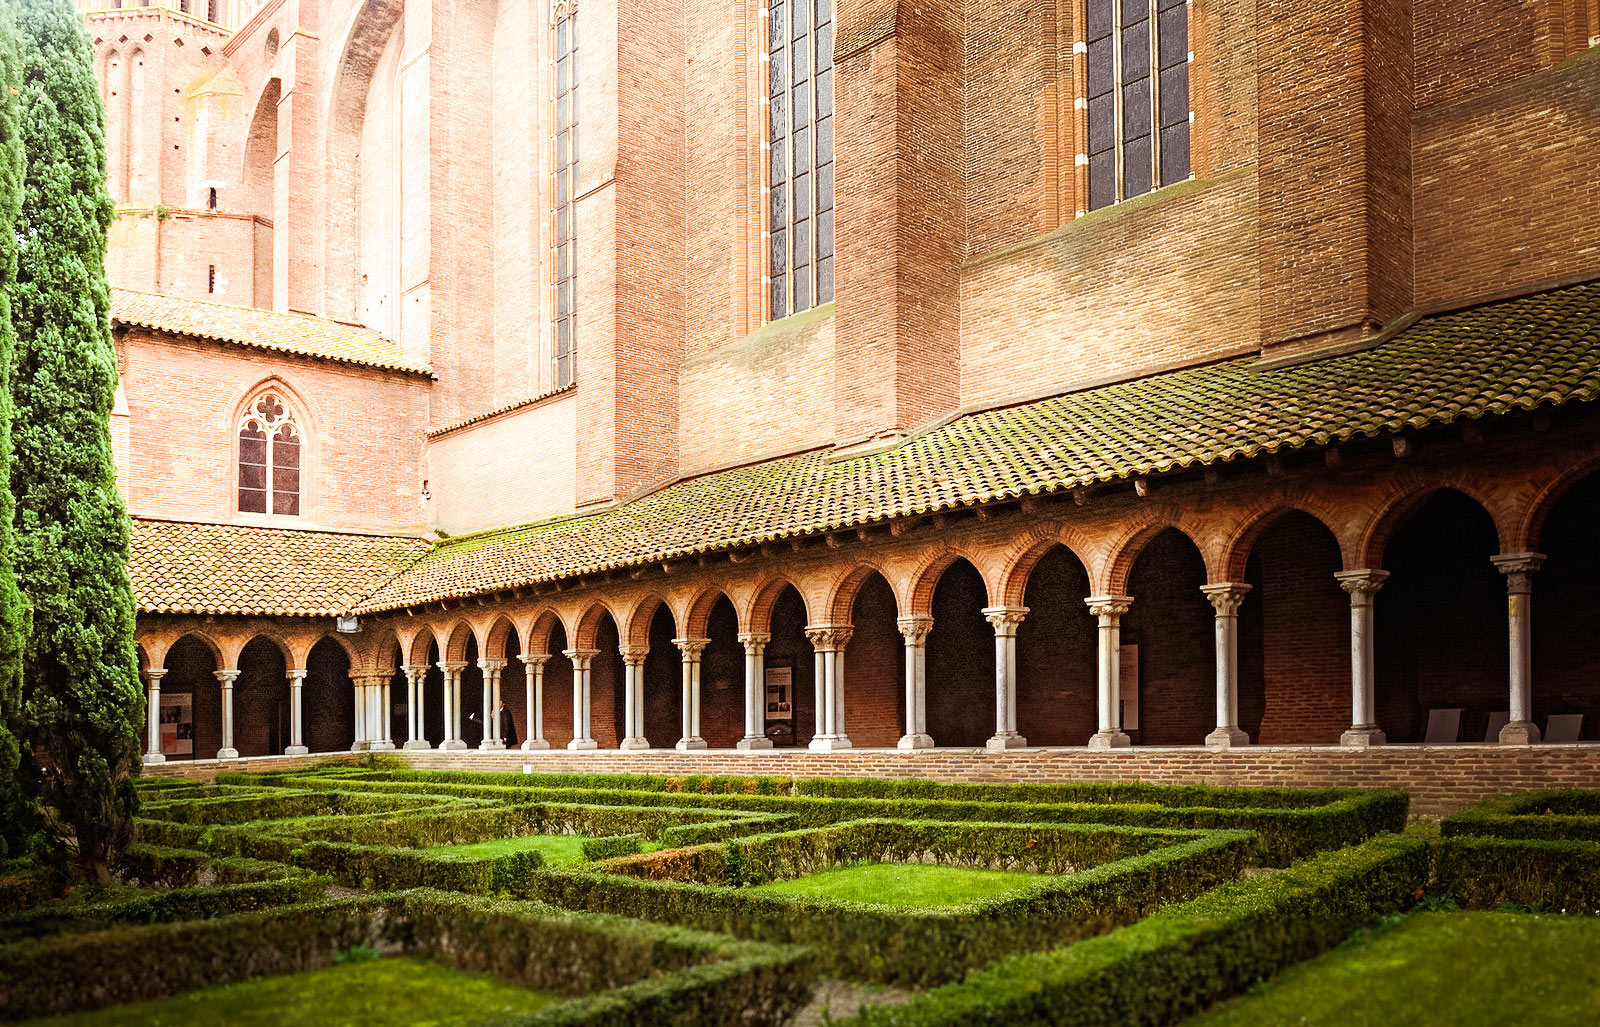 The cloister of the Convent of the Jacobins - 3 days in Toulouse itinerary